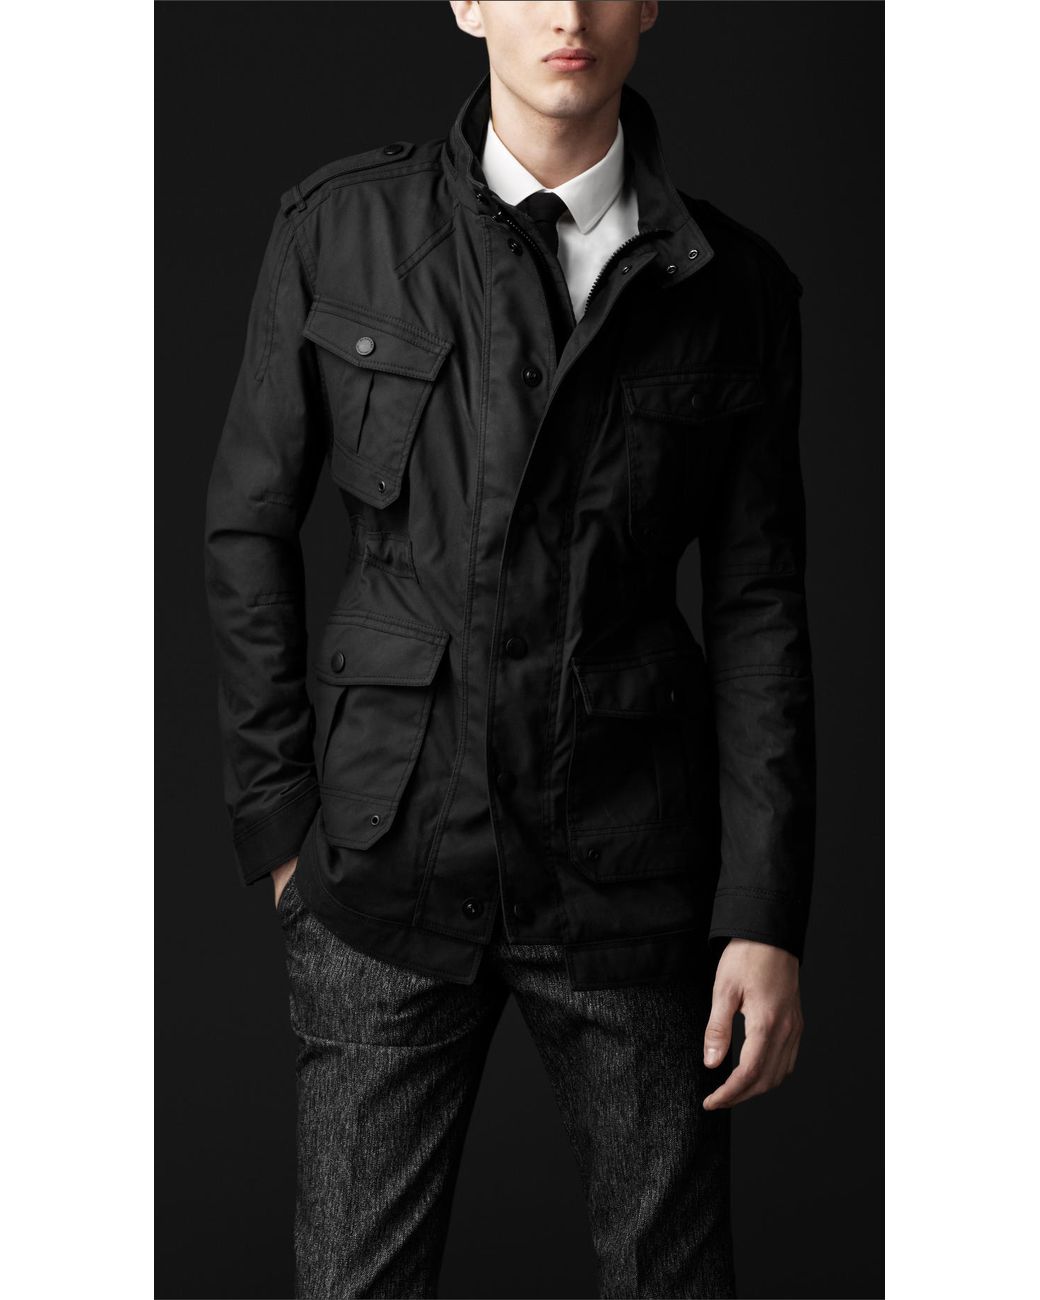 Burberry Prorsum Waxed Cotton Field Jacket in Black for Men | Lyst